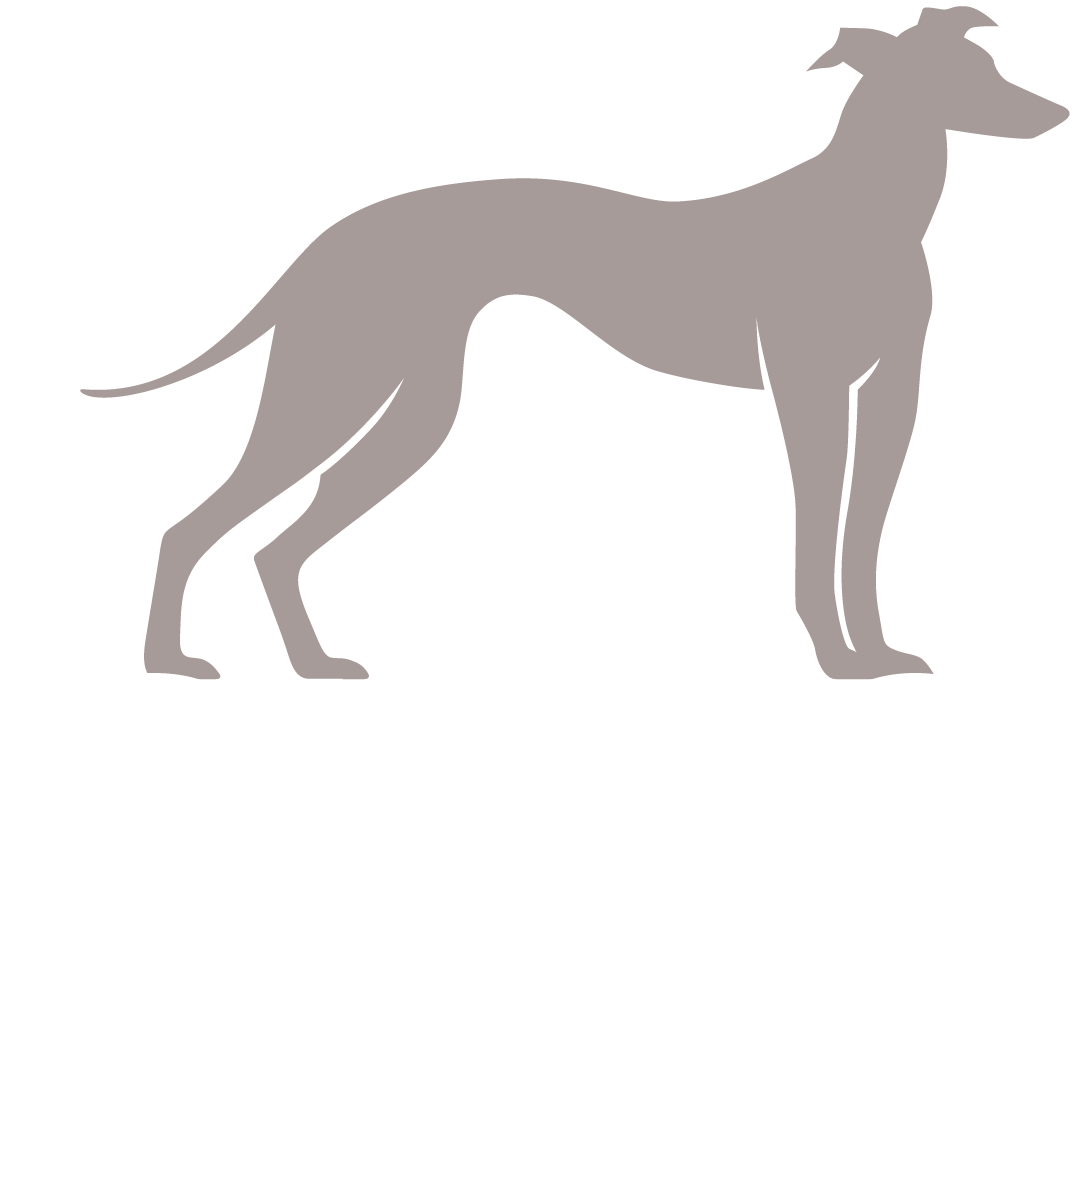 Greyhound Welfare and Integrity Commission